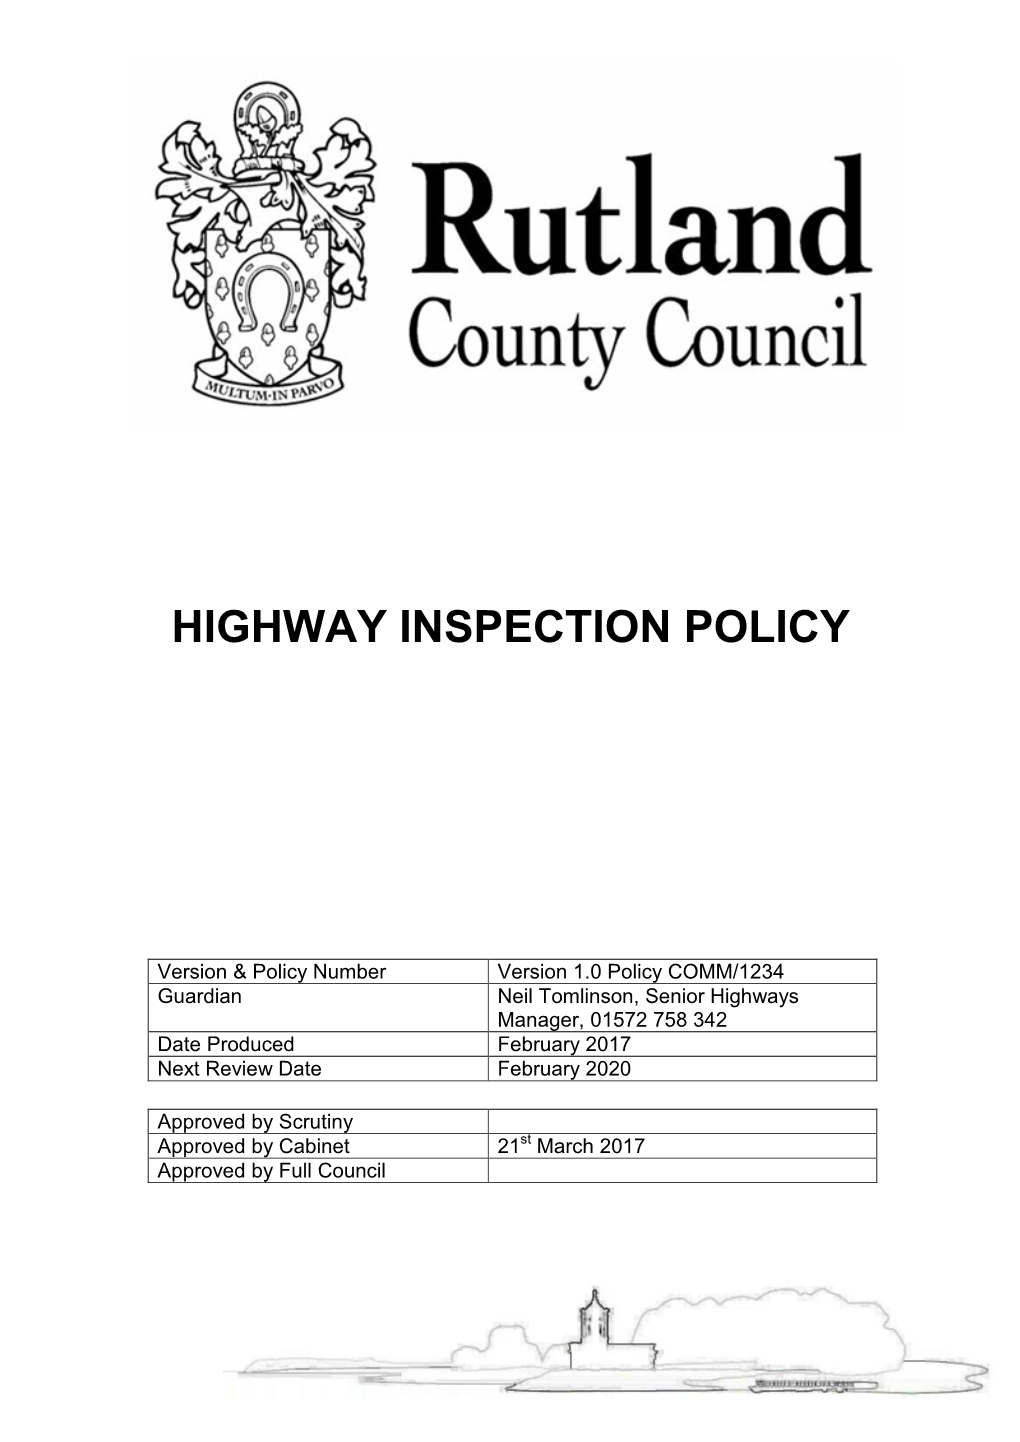 Highway Inspection Policy